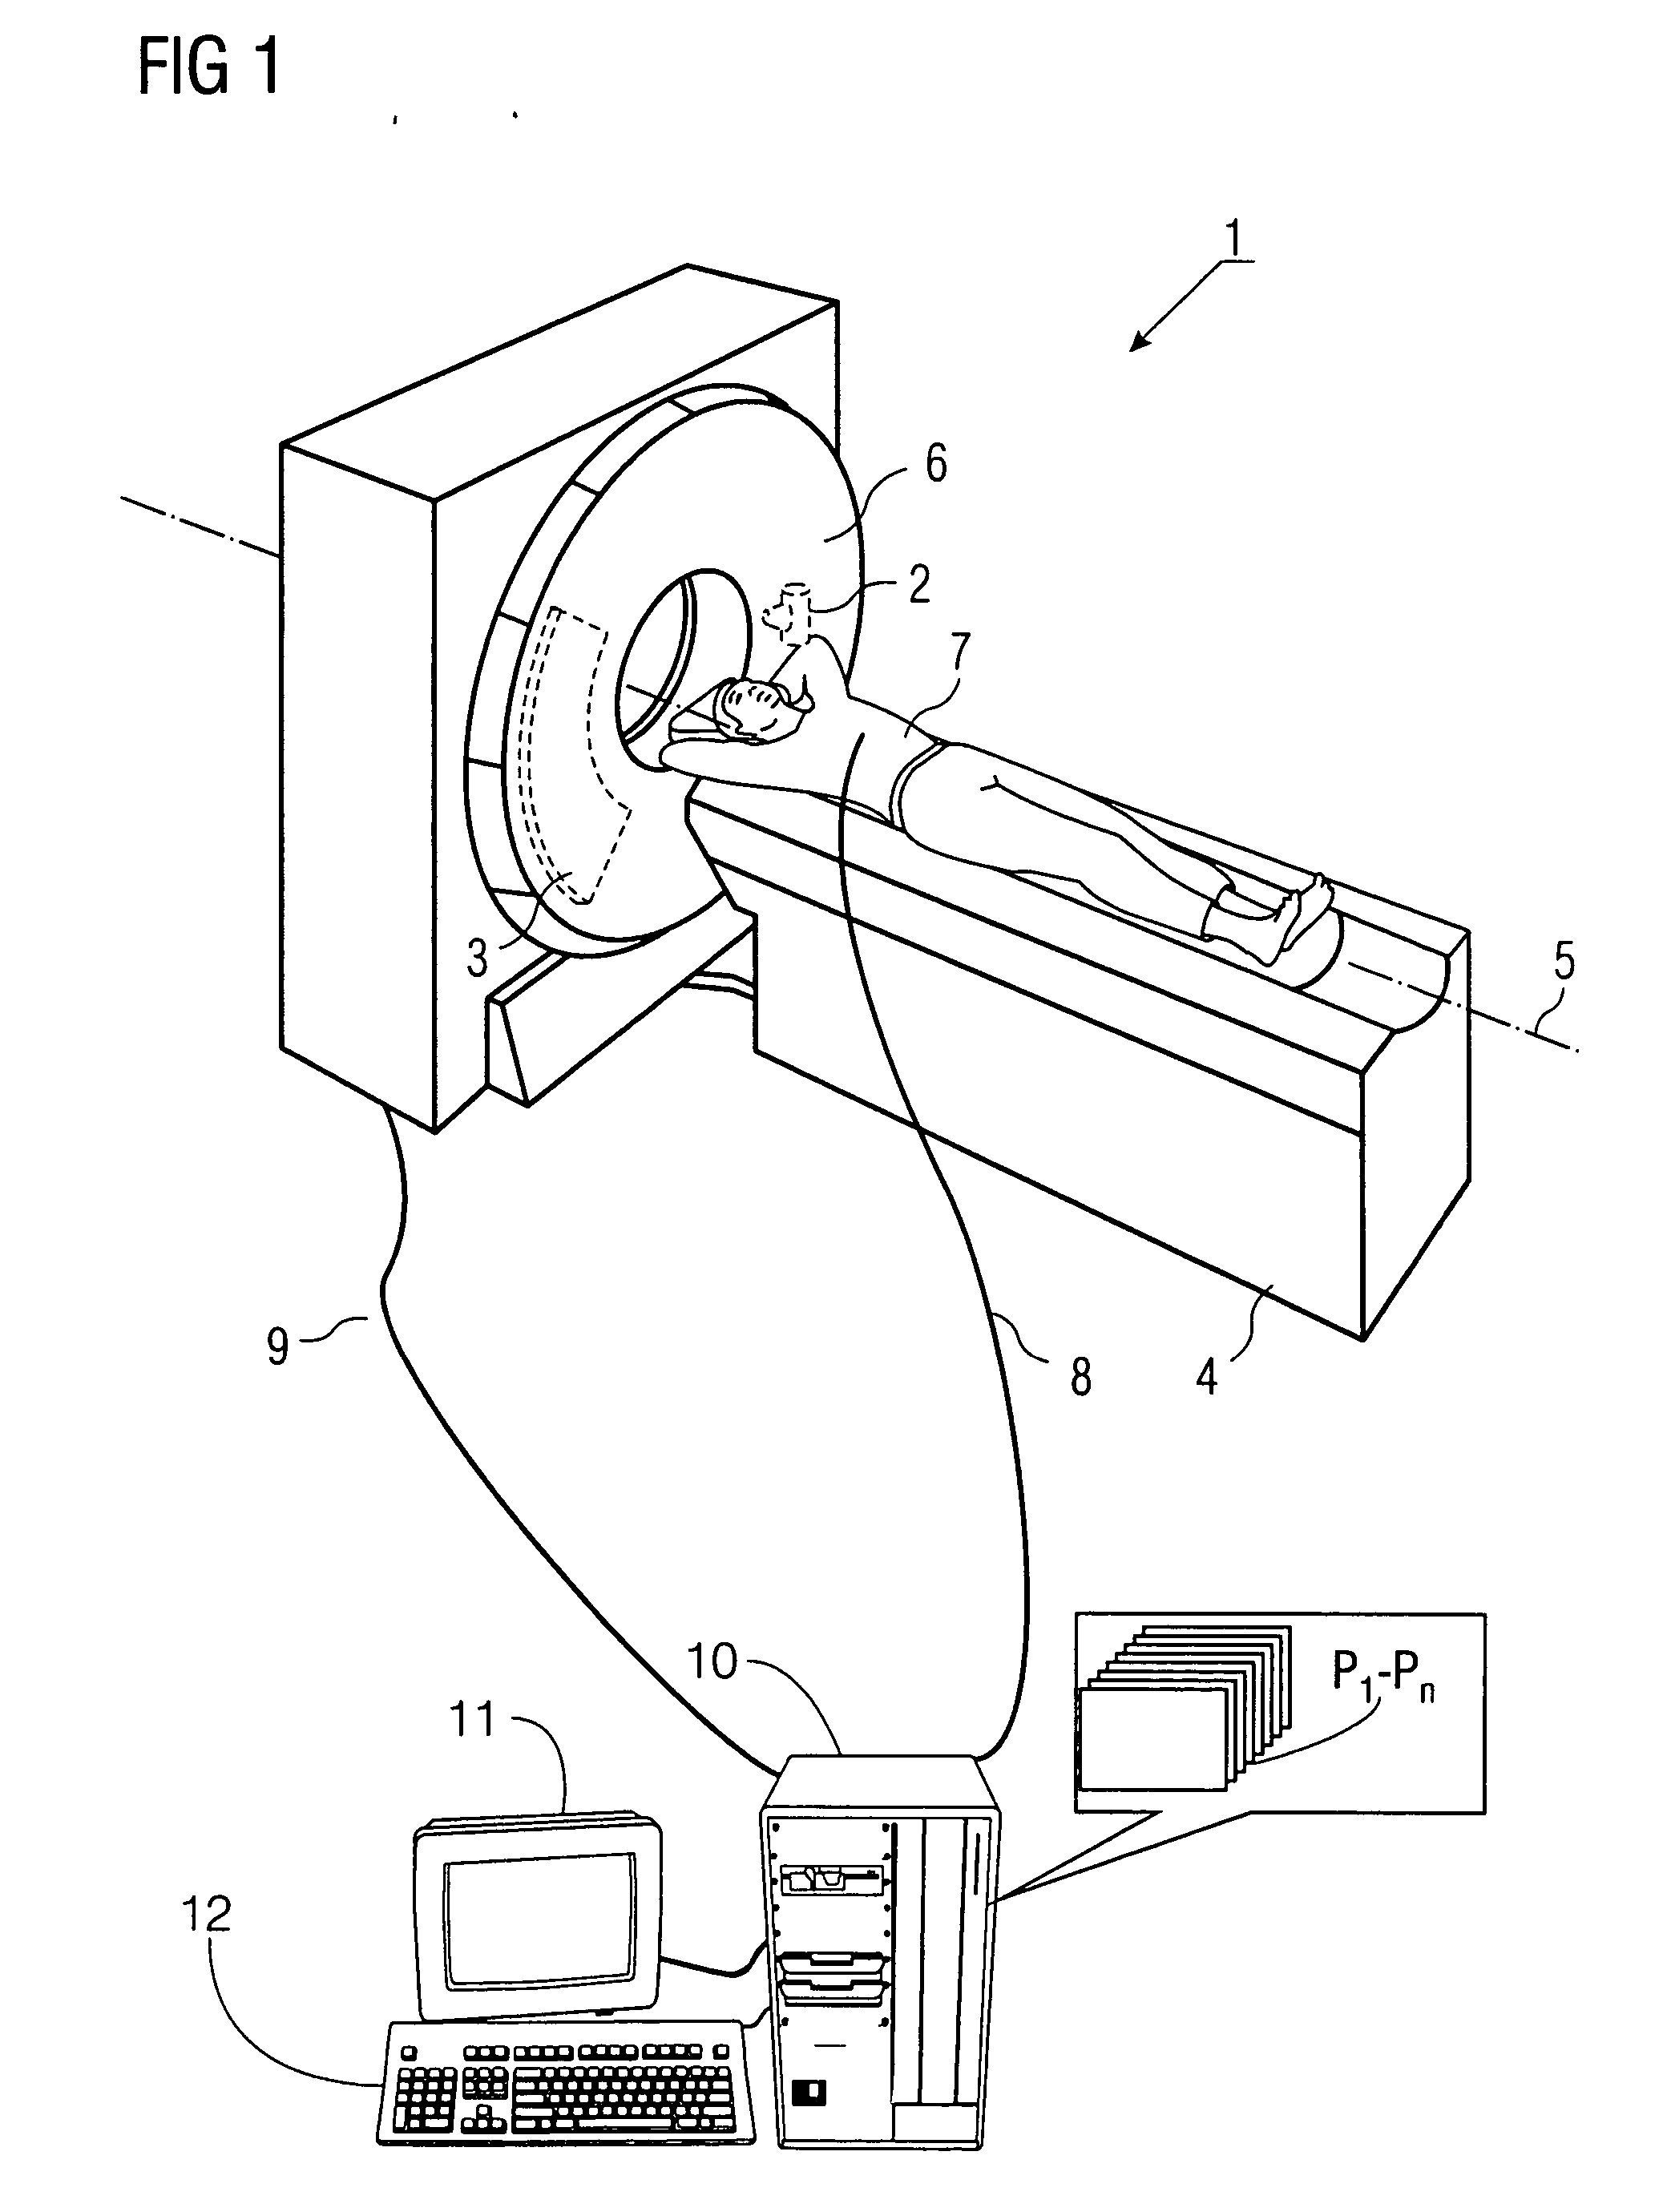 Method for producing tomograms of a periodically moving object with the aid of a focus/detector combination